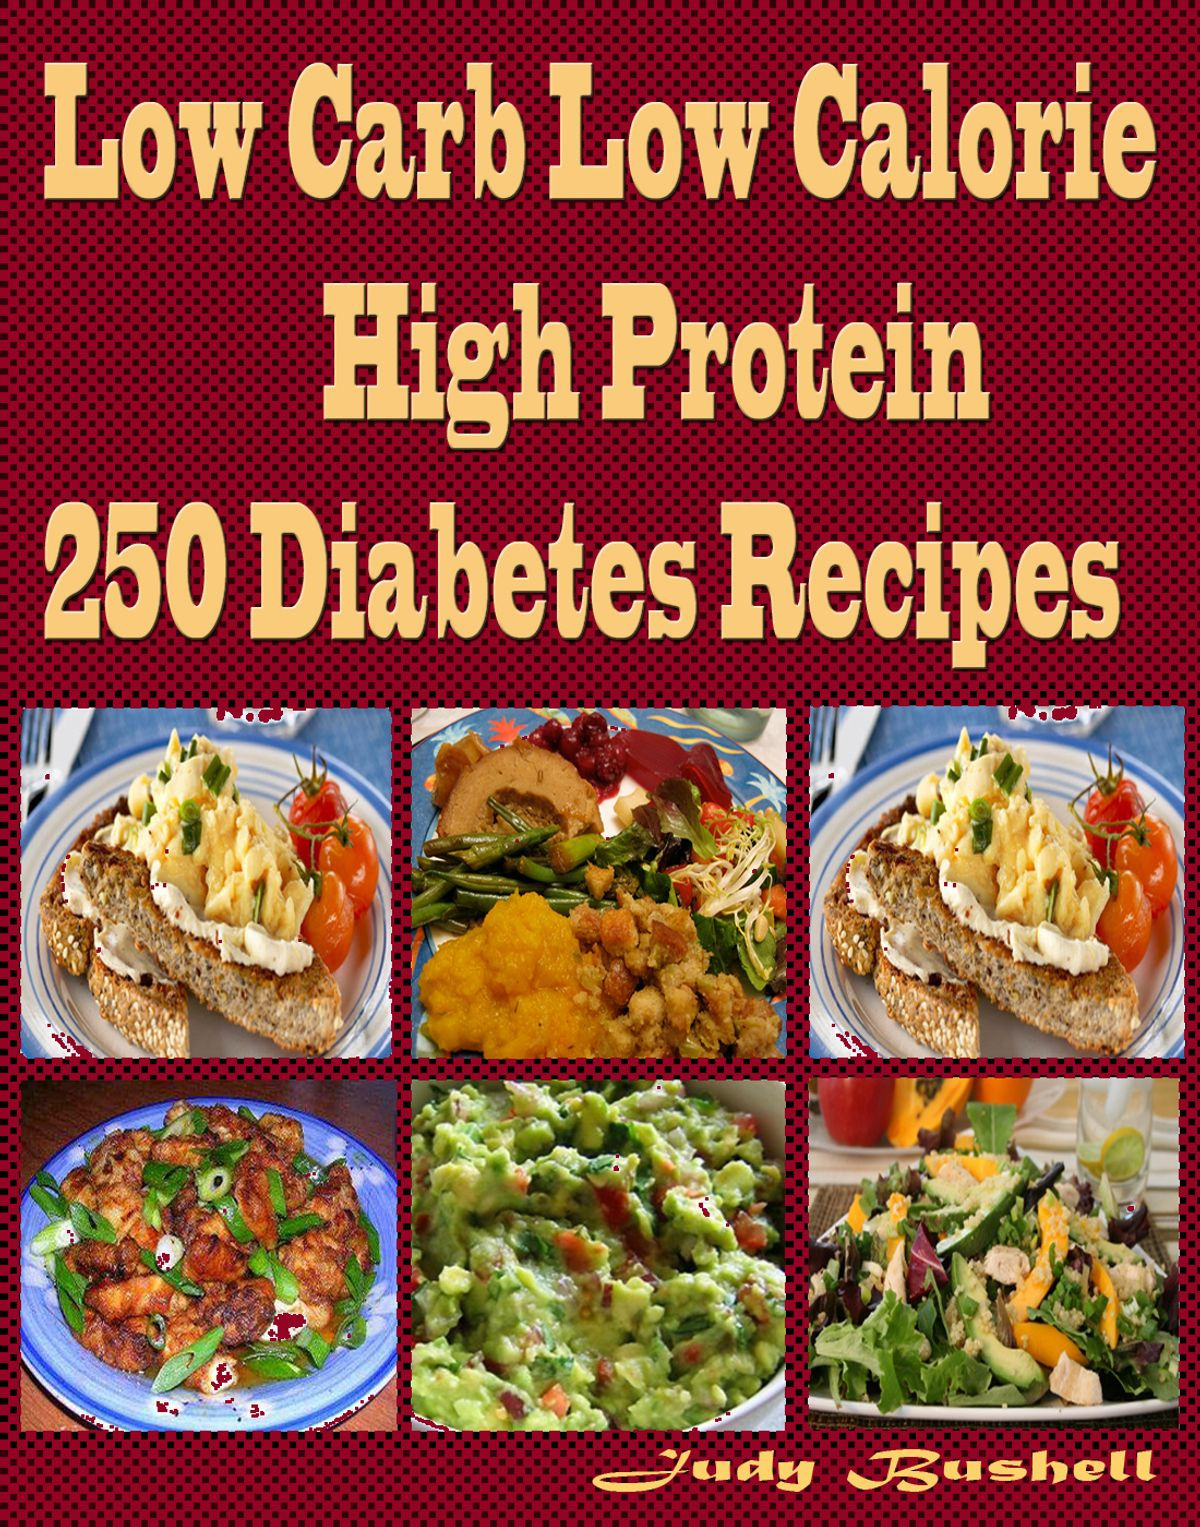 Low Calorie High Protein Recipes Fresh Low Carb Low Calorie High Protein 250 Diabetes Recipes